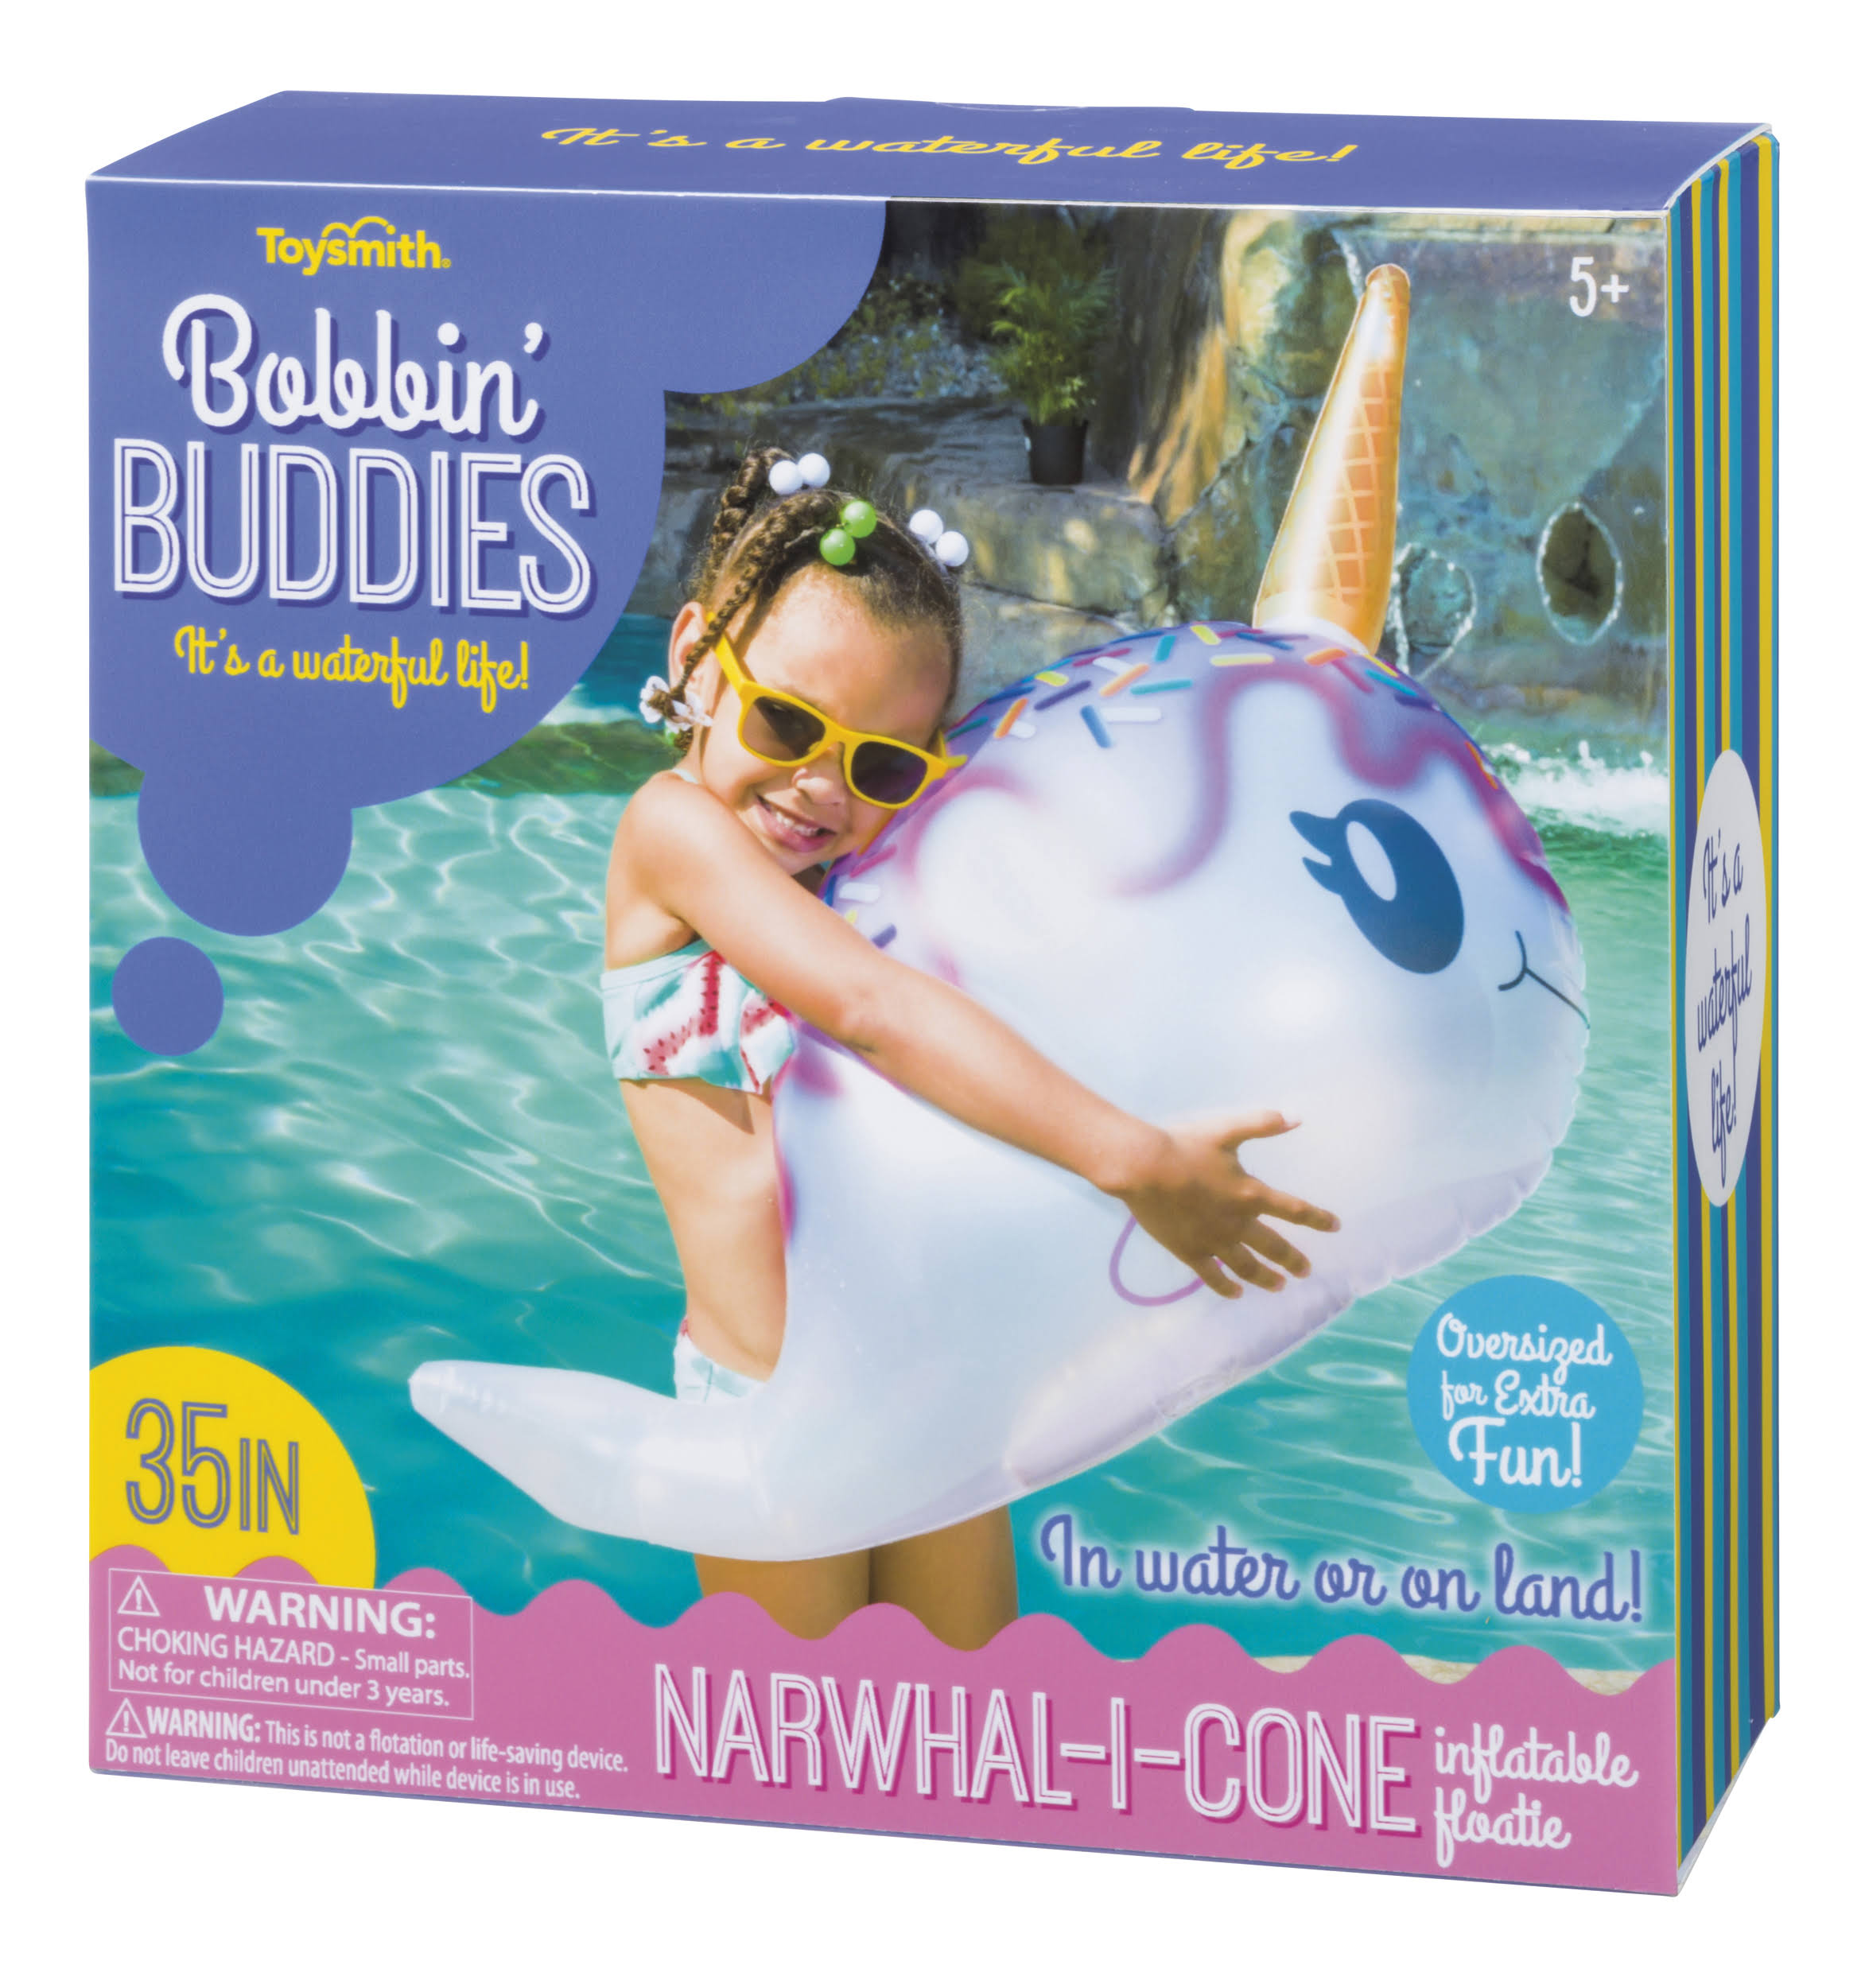 Toysmith Bobbin Buddies Narwhal I Cone Inflatable Pool Toy